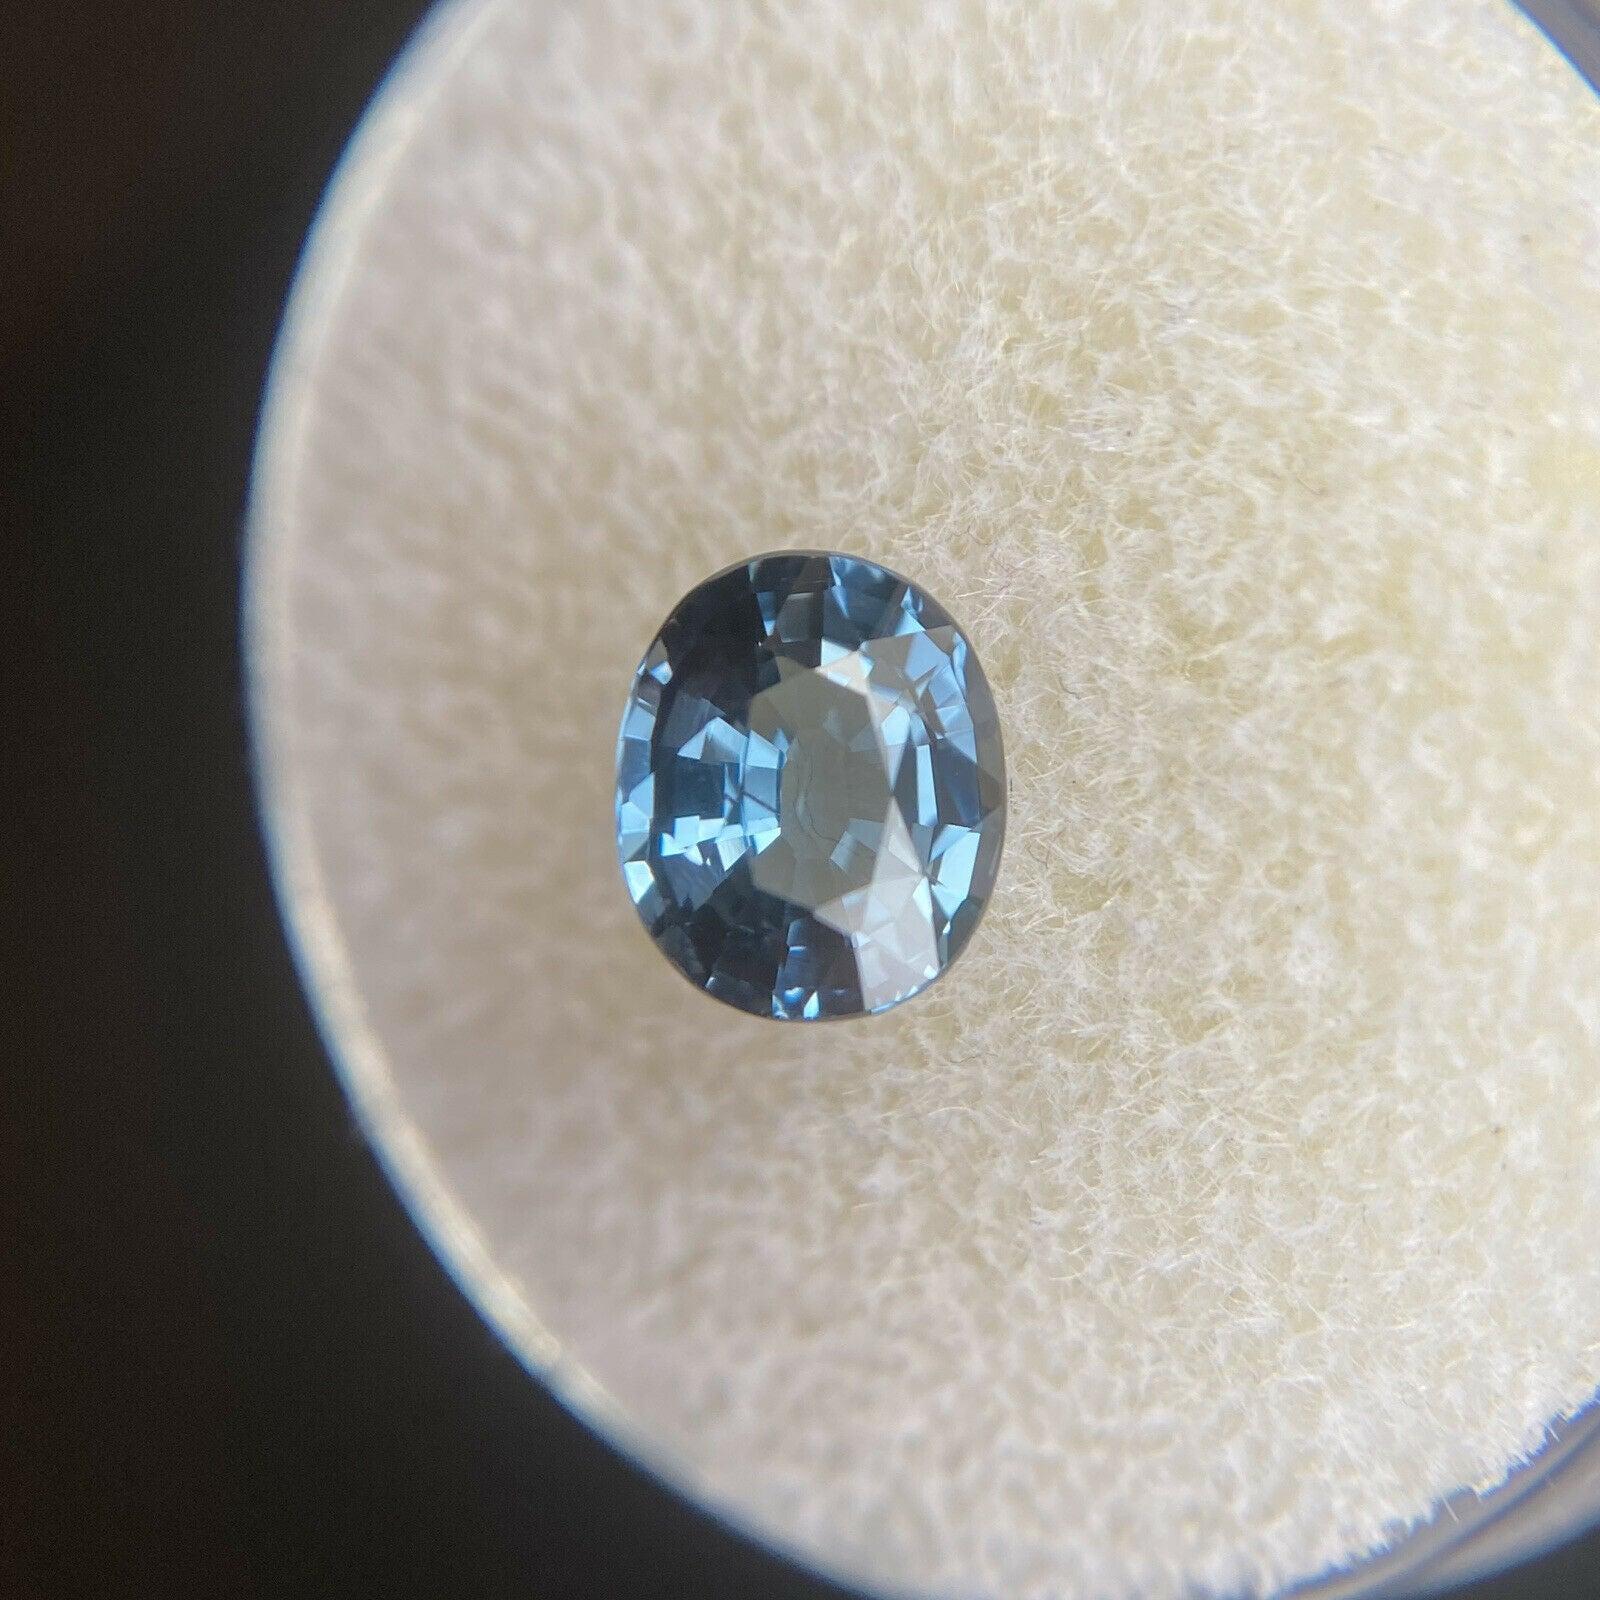 Fine Blue Spinel 1.20ct Oval Cut Rare Gemstone 7 x 5.8mm Loose Rare Gem

Fine Natural Blue Spinel Gemstone. 
Rare spinel with a fine vivid blue colour and excellent clarity. Practically flawless gem. Totally untreated and unheated. Also has an